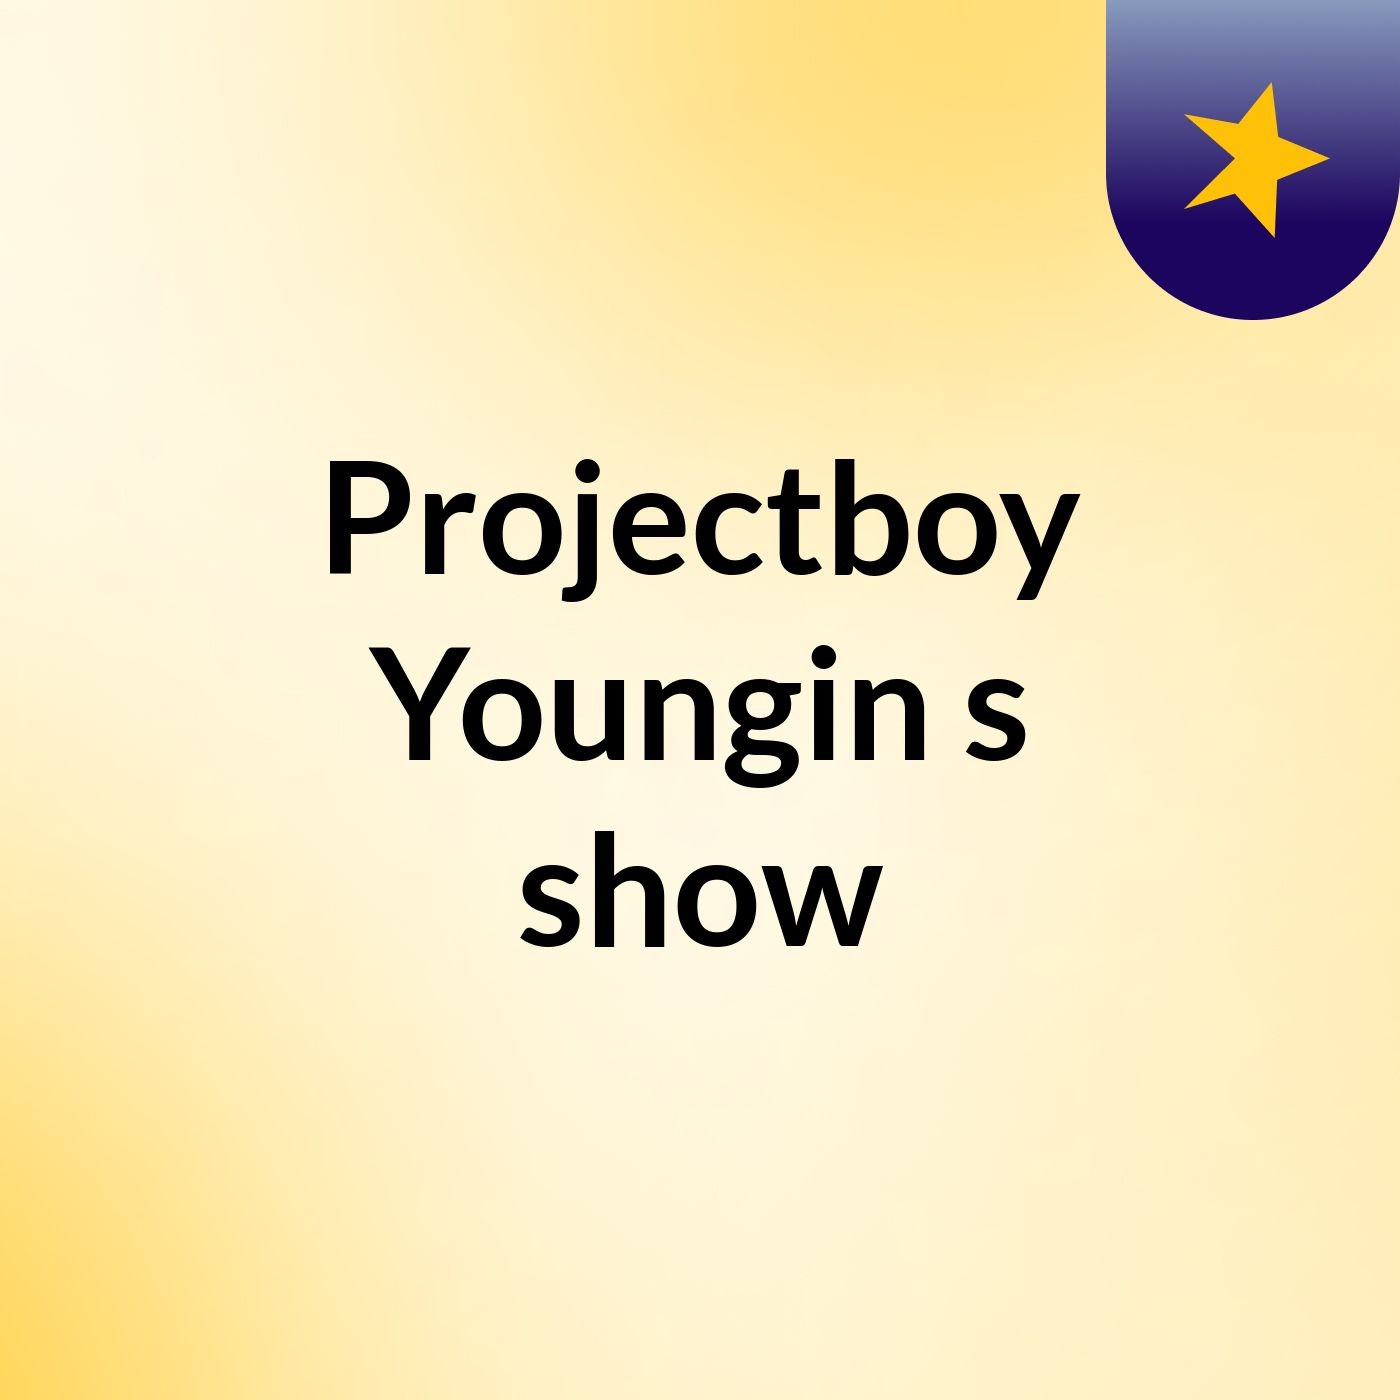 Projectboy Youngin's show